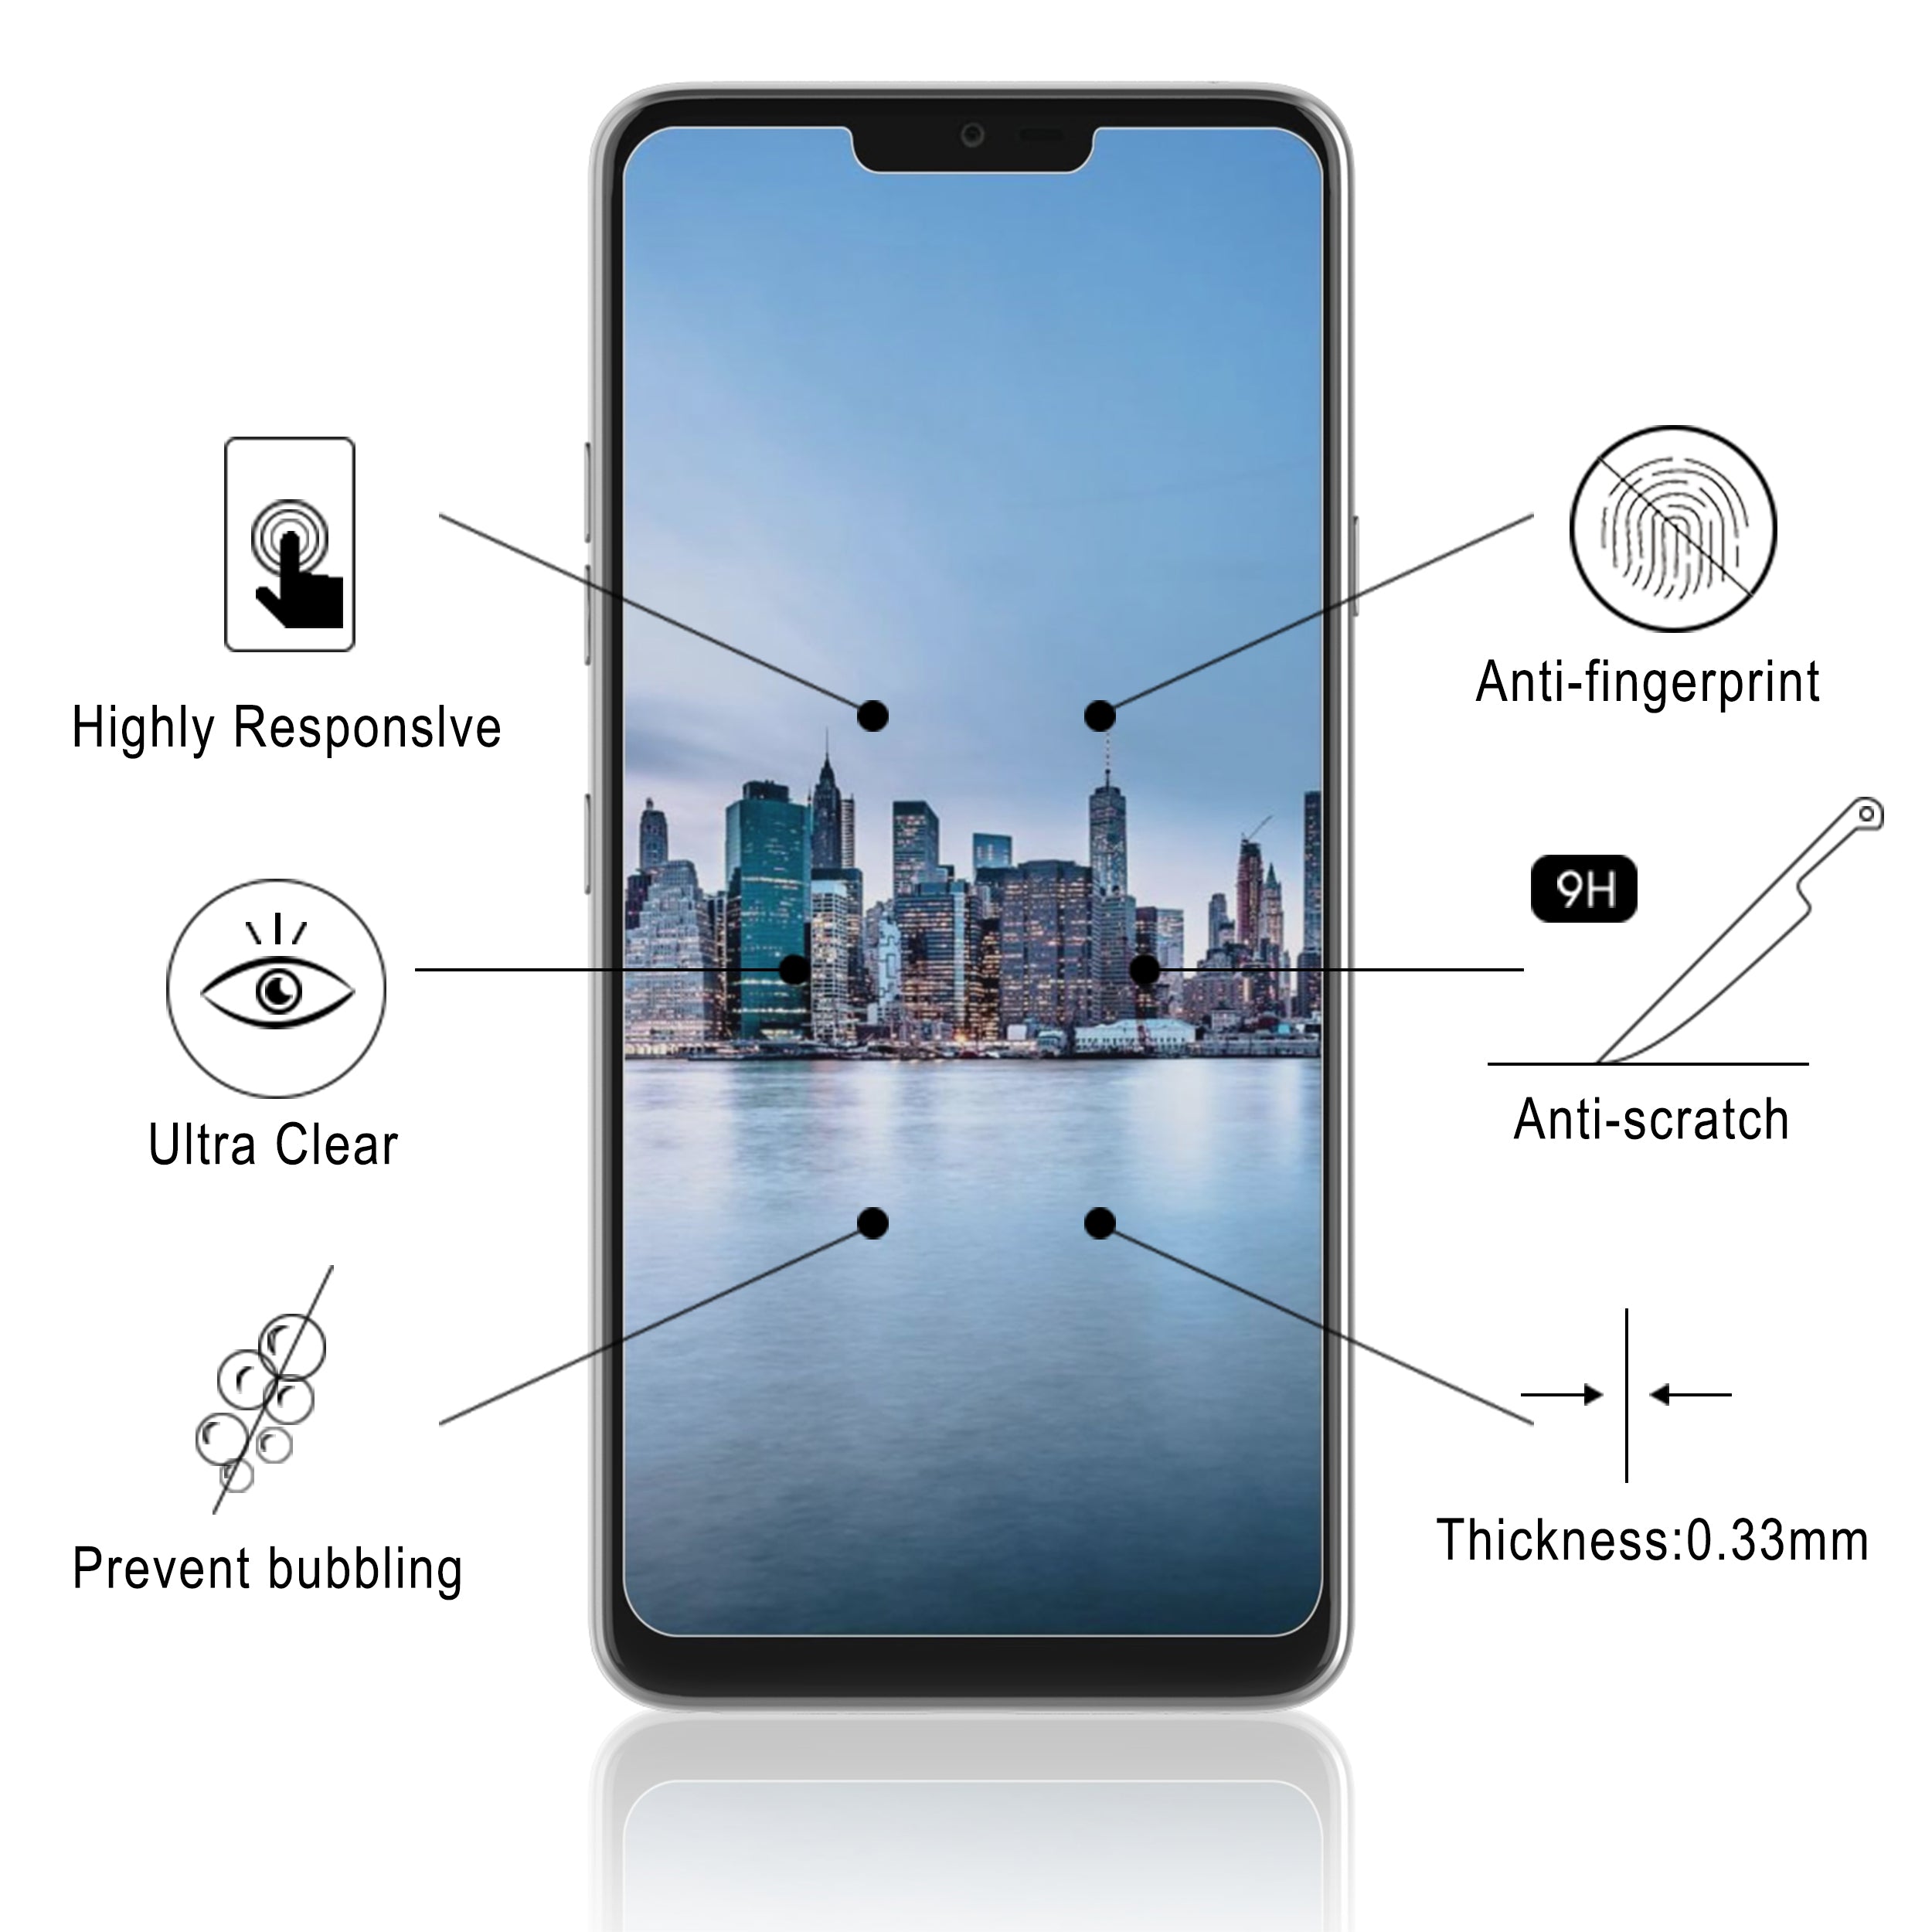 LUVVITT TEMPERED GLASS Screen Protector for LG G7 ThinQ Case Friendly - 2 Pack